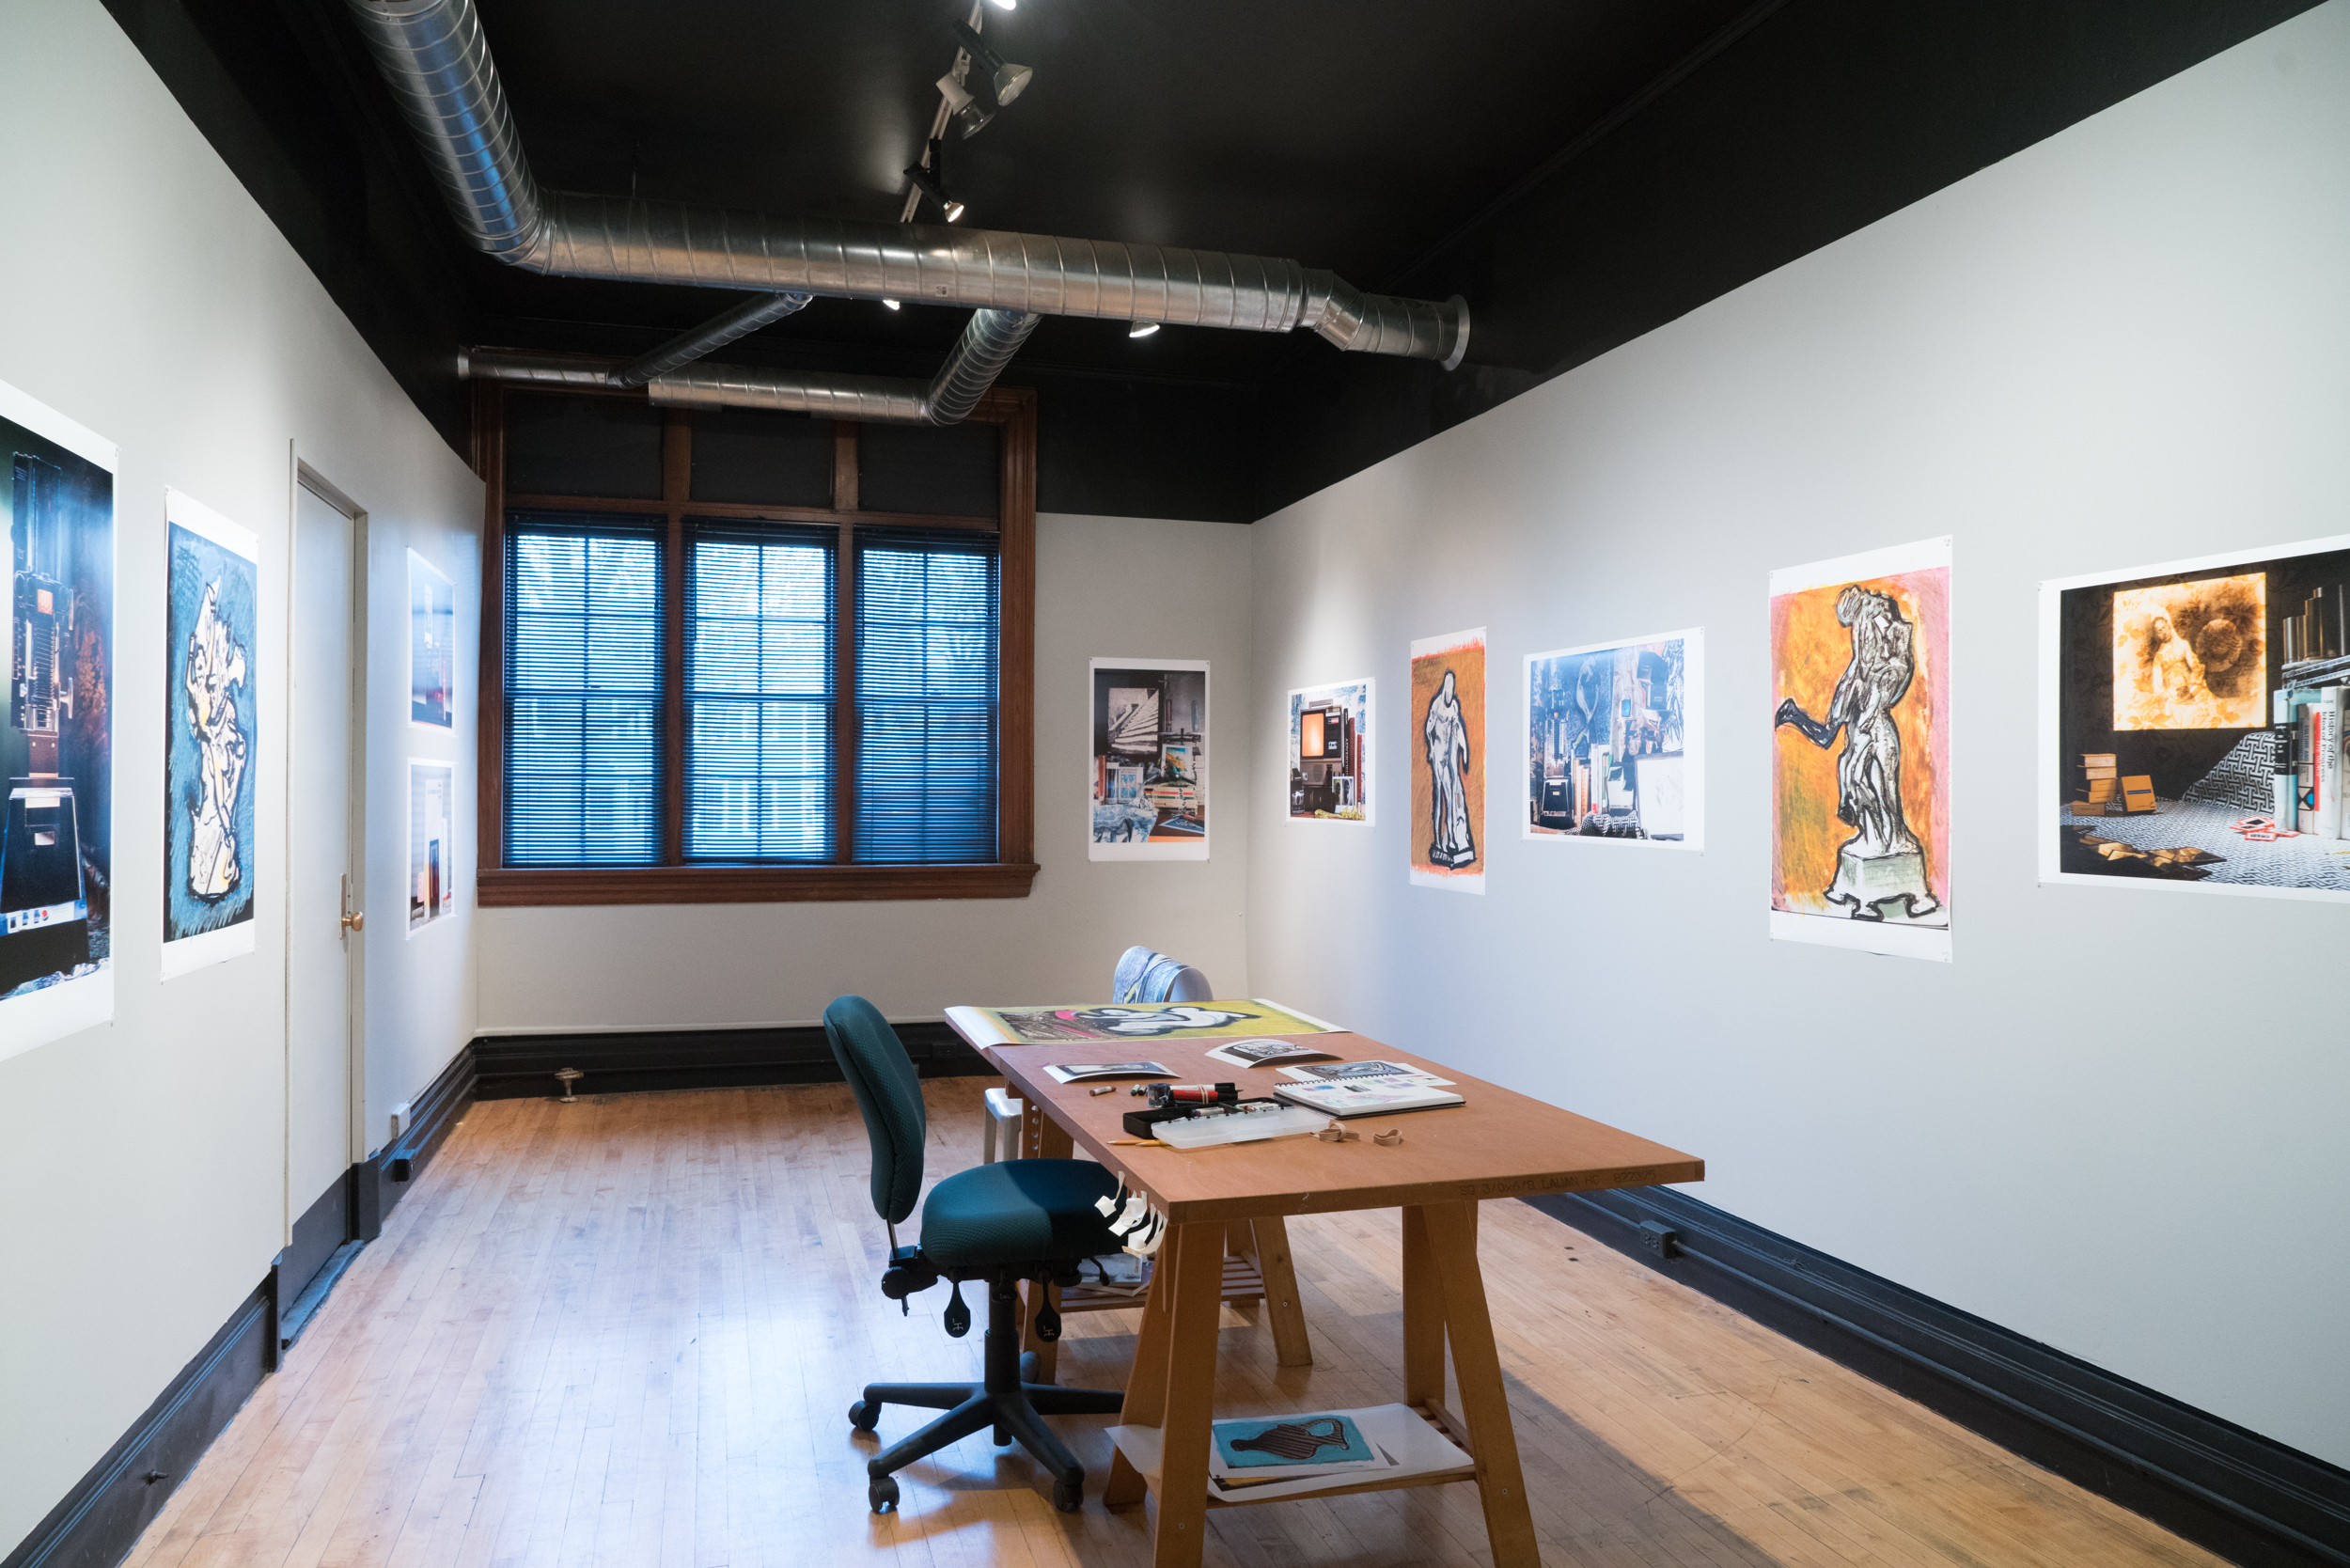 Installation view at the Visual Studies Workshop